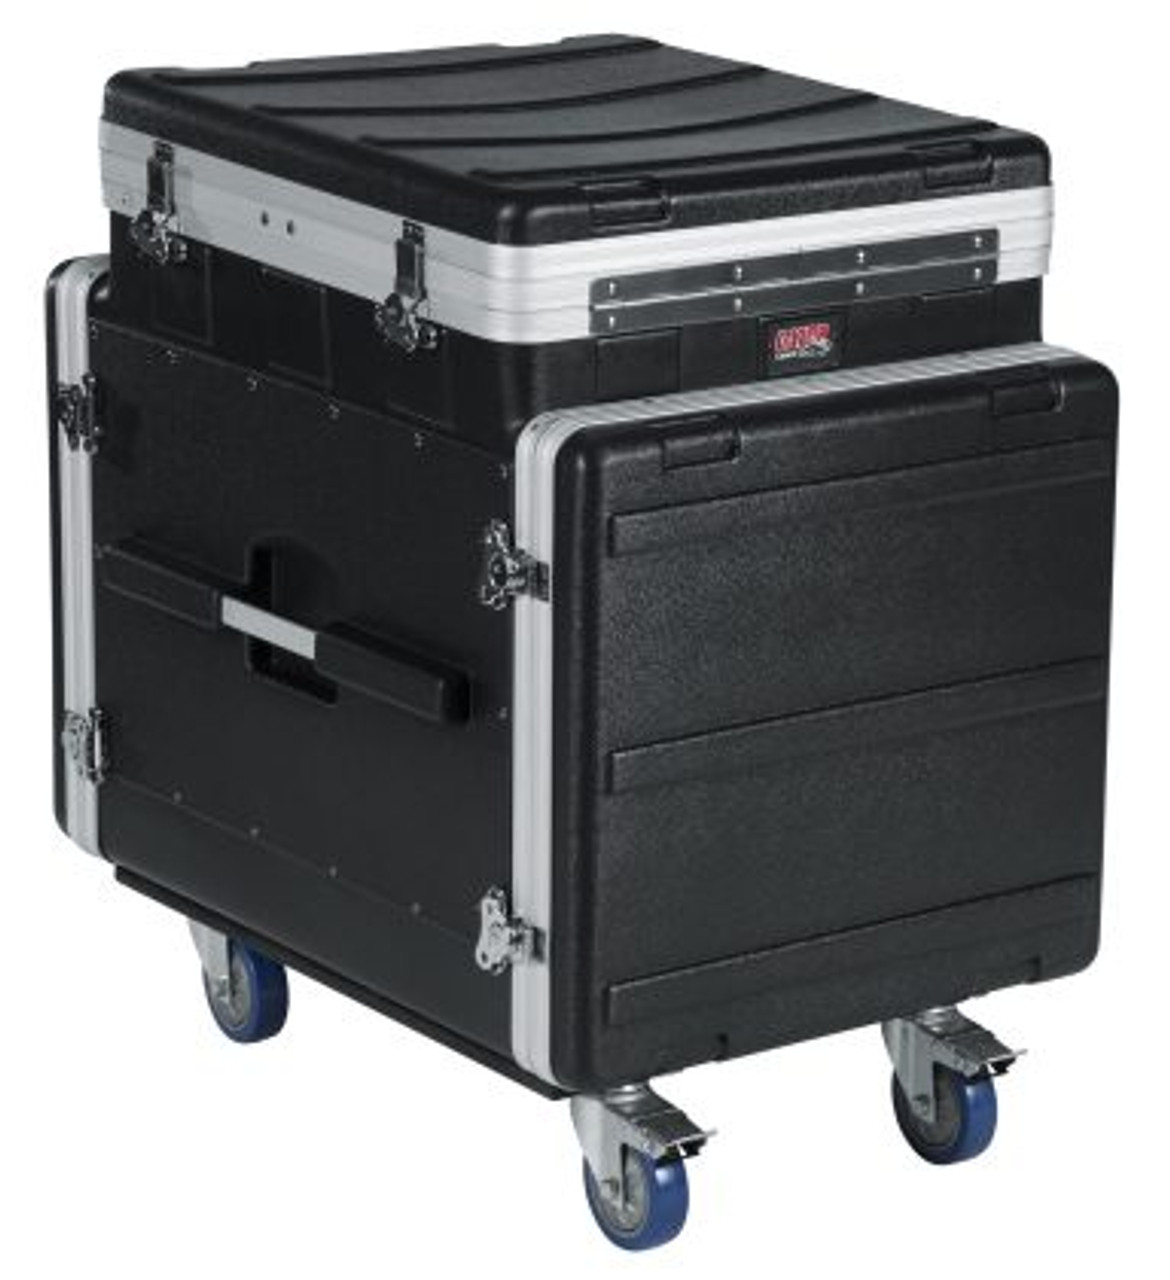 Gator GRC-12X10 PU ATA Molded PE Pop-Up Console Rack With Casters